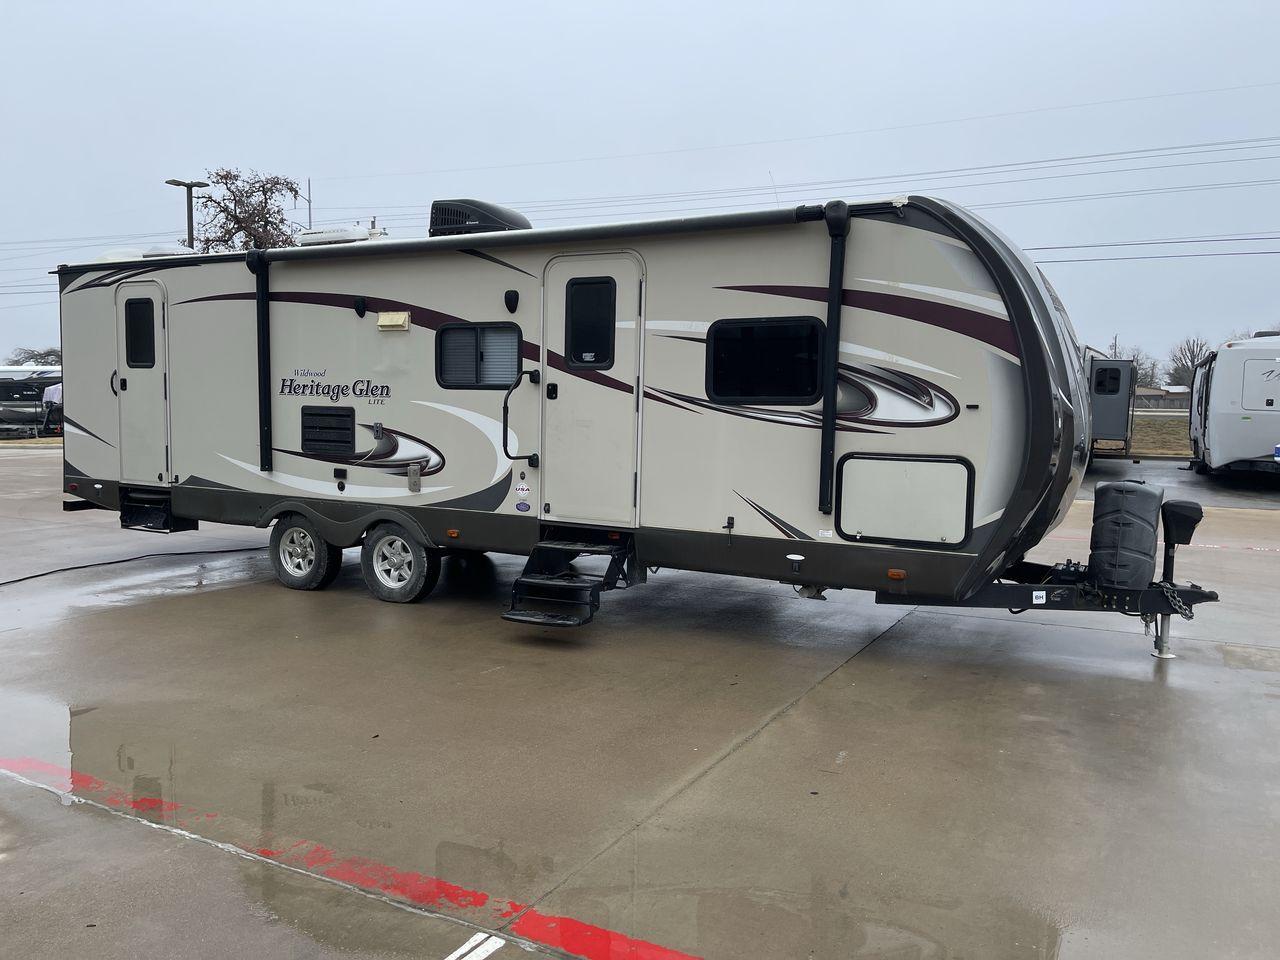 2015 TAN FOREST RIVER HERITAGE GLEN 272BH (4X4TWBC28FU) , Length: 32.25 ft. | Dry Weight: 6,285 lbs. | Gross Weight: 9,450 lbs. | Slides: 1 transmission, located at 4319 N Main Street, Cleburne, TX, 76033, (817) 221-0660, 32.435829, -97.384178 - The 2015 Forest River Heritage Glen 272BH CT is a travel trailer designed to combine comfort, innovation, and family-friendly features for memorable camping experiences. It is a well-balanced and efficiently designed travel trailer, measuring approximately 32.25 feet in length and boasting a dry wei - Photo #23